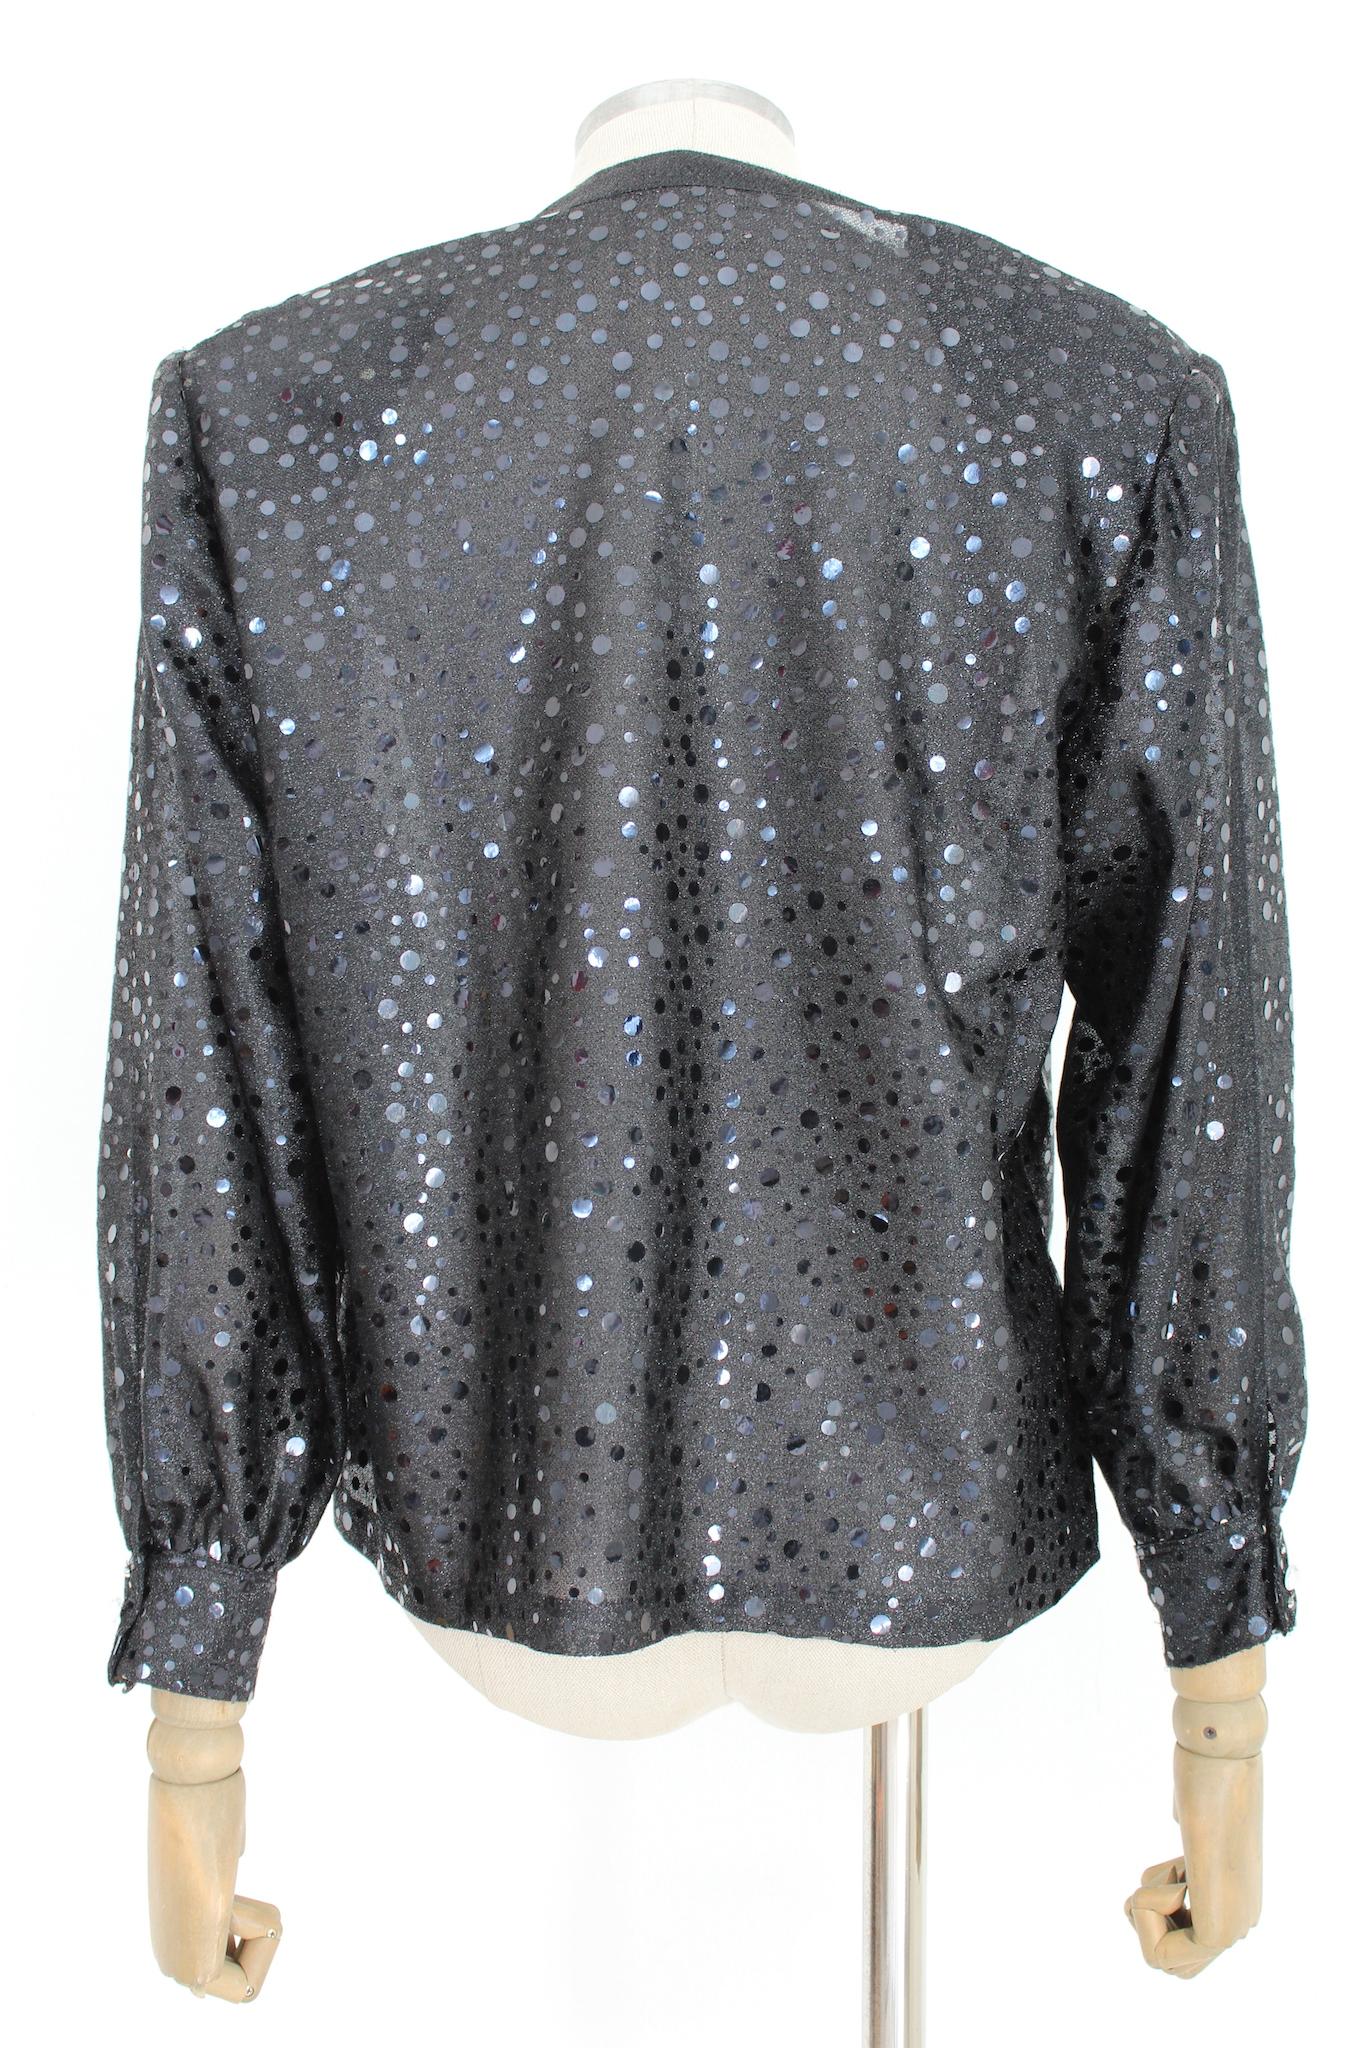 Vintage 80s black sequins handmade shirt. Evening under jacket in shiny fabric with V-neckline. Asymmetrical rhinestones and applied clasps. Large 80's shoulder straps, polyester fabric. Made in Italy.

Size: 46 It 12 Us 14 Uk

Shoulder: 46 cm
Bust